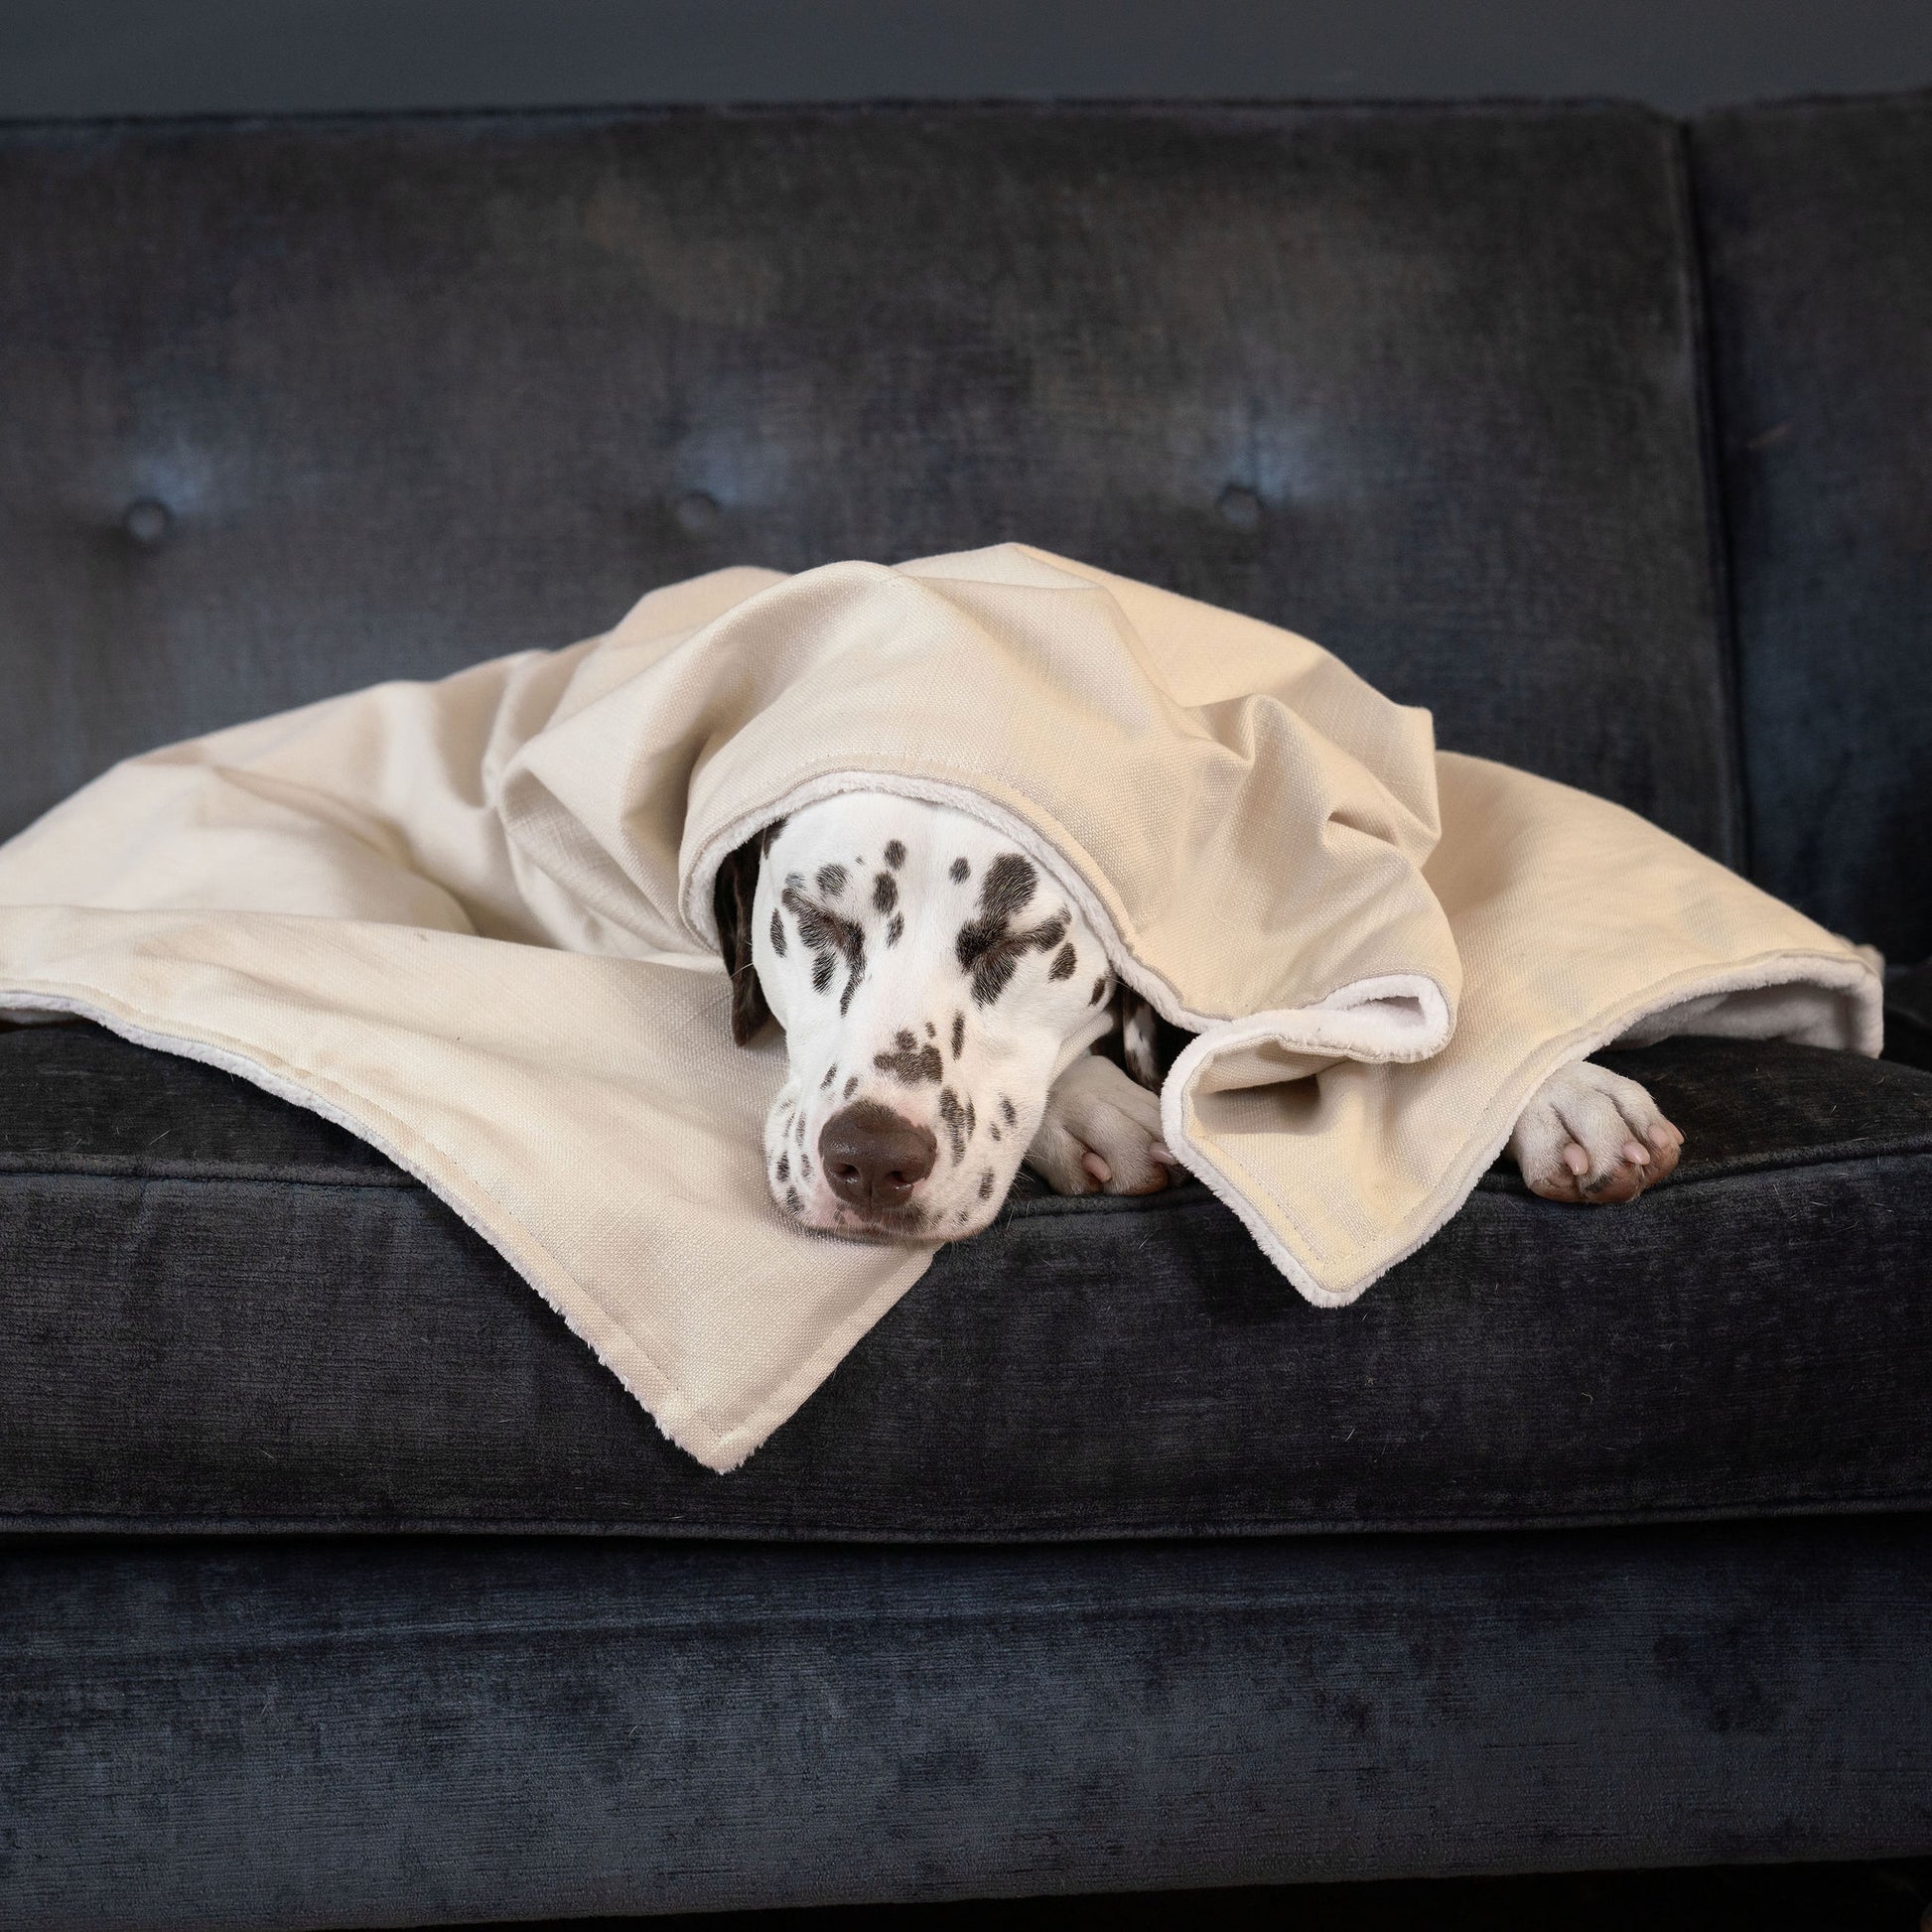 Discover Our Luxurious Savanna Bone Dog Blanket With Super Soft Sherpa & Teddy Fleece, The Perfect Blanket For Puppies, Available To Personalize And In 2 Sizes Here at Lords & Labradors US